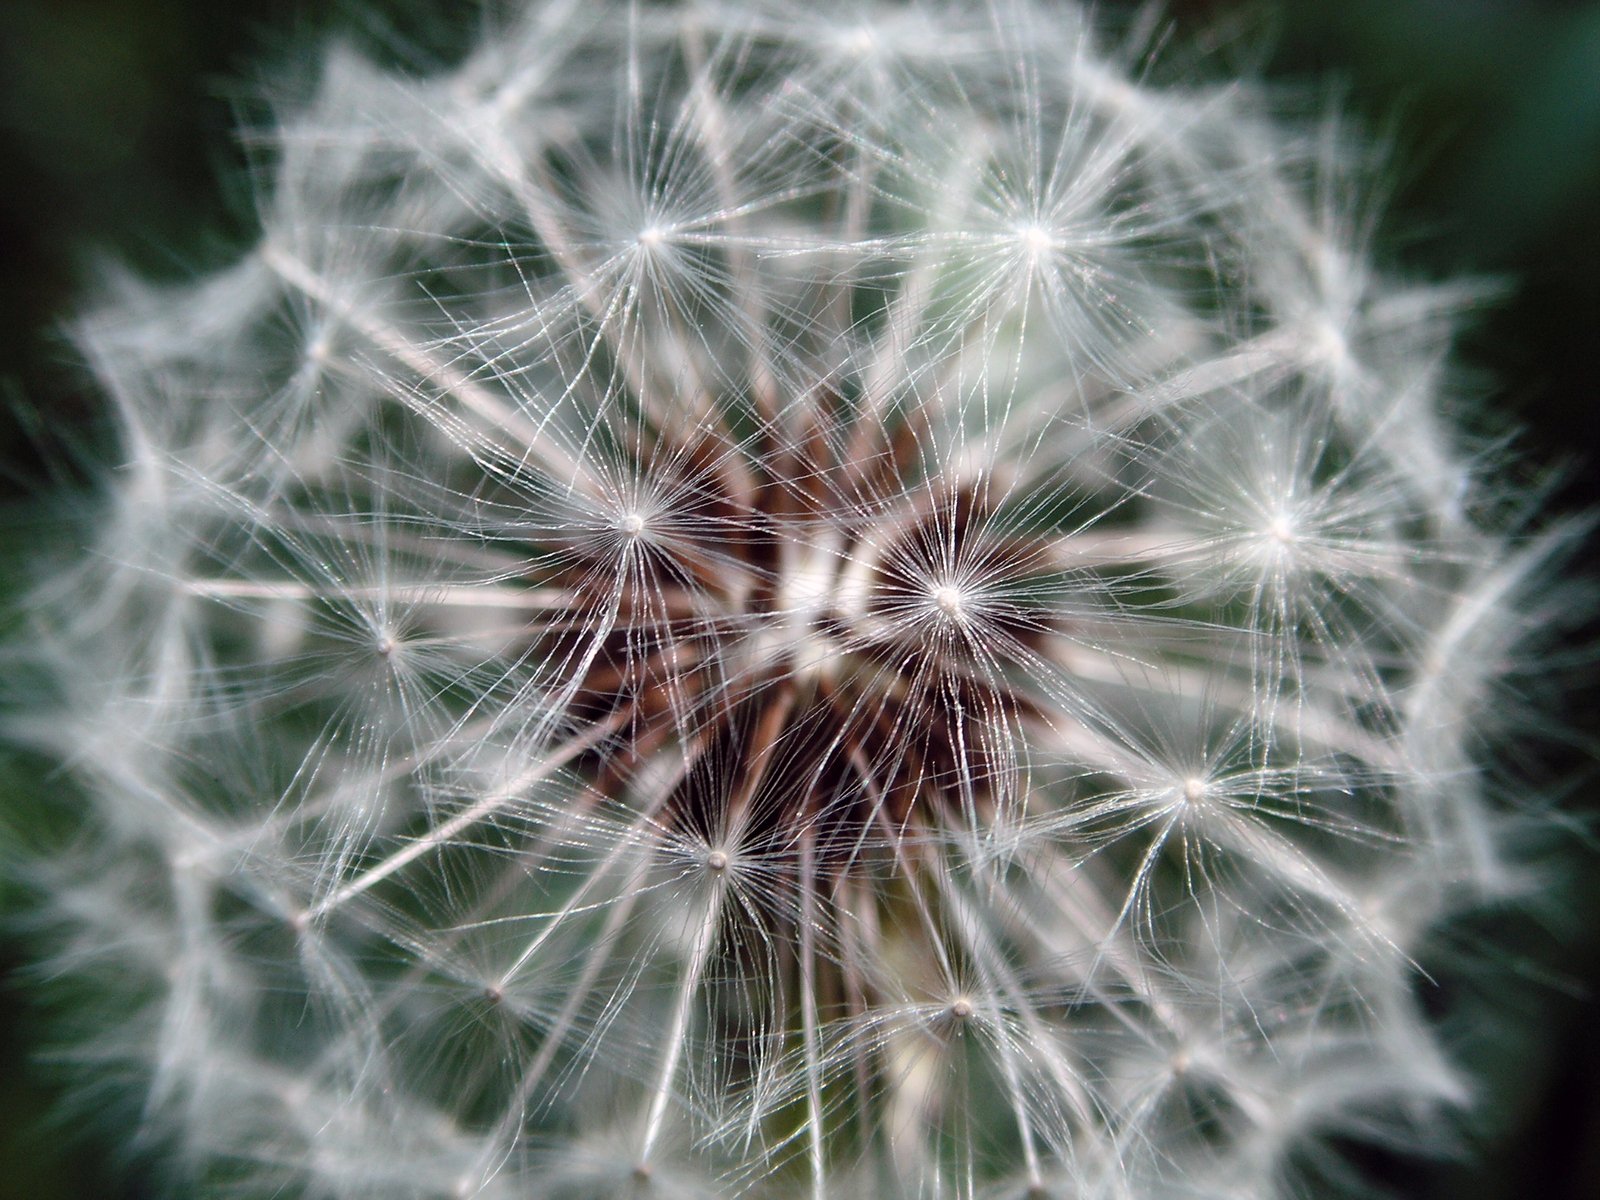 a dandelion is pictured with its seeds turned to show the seed head